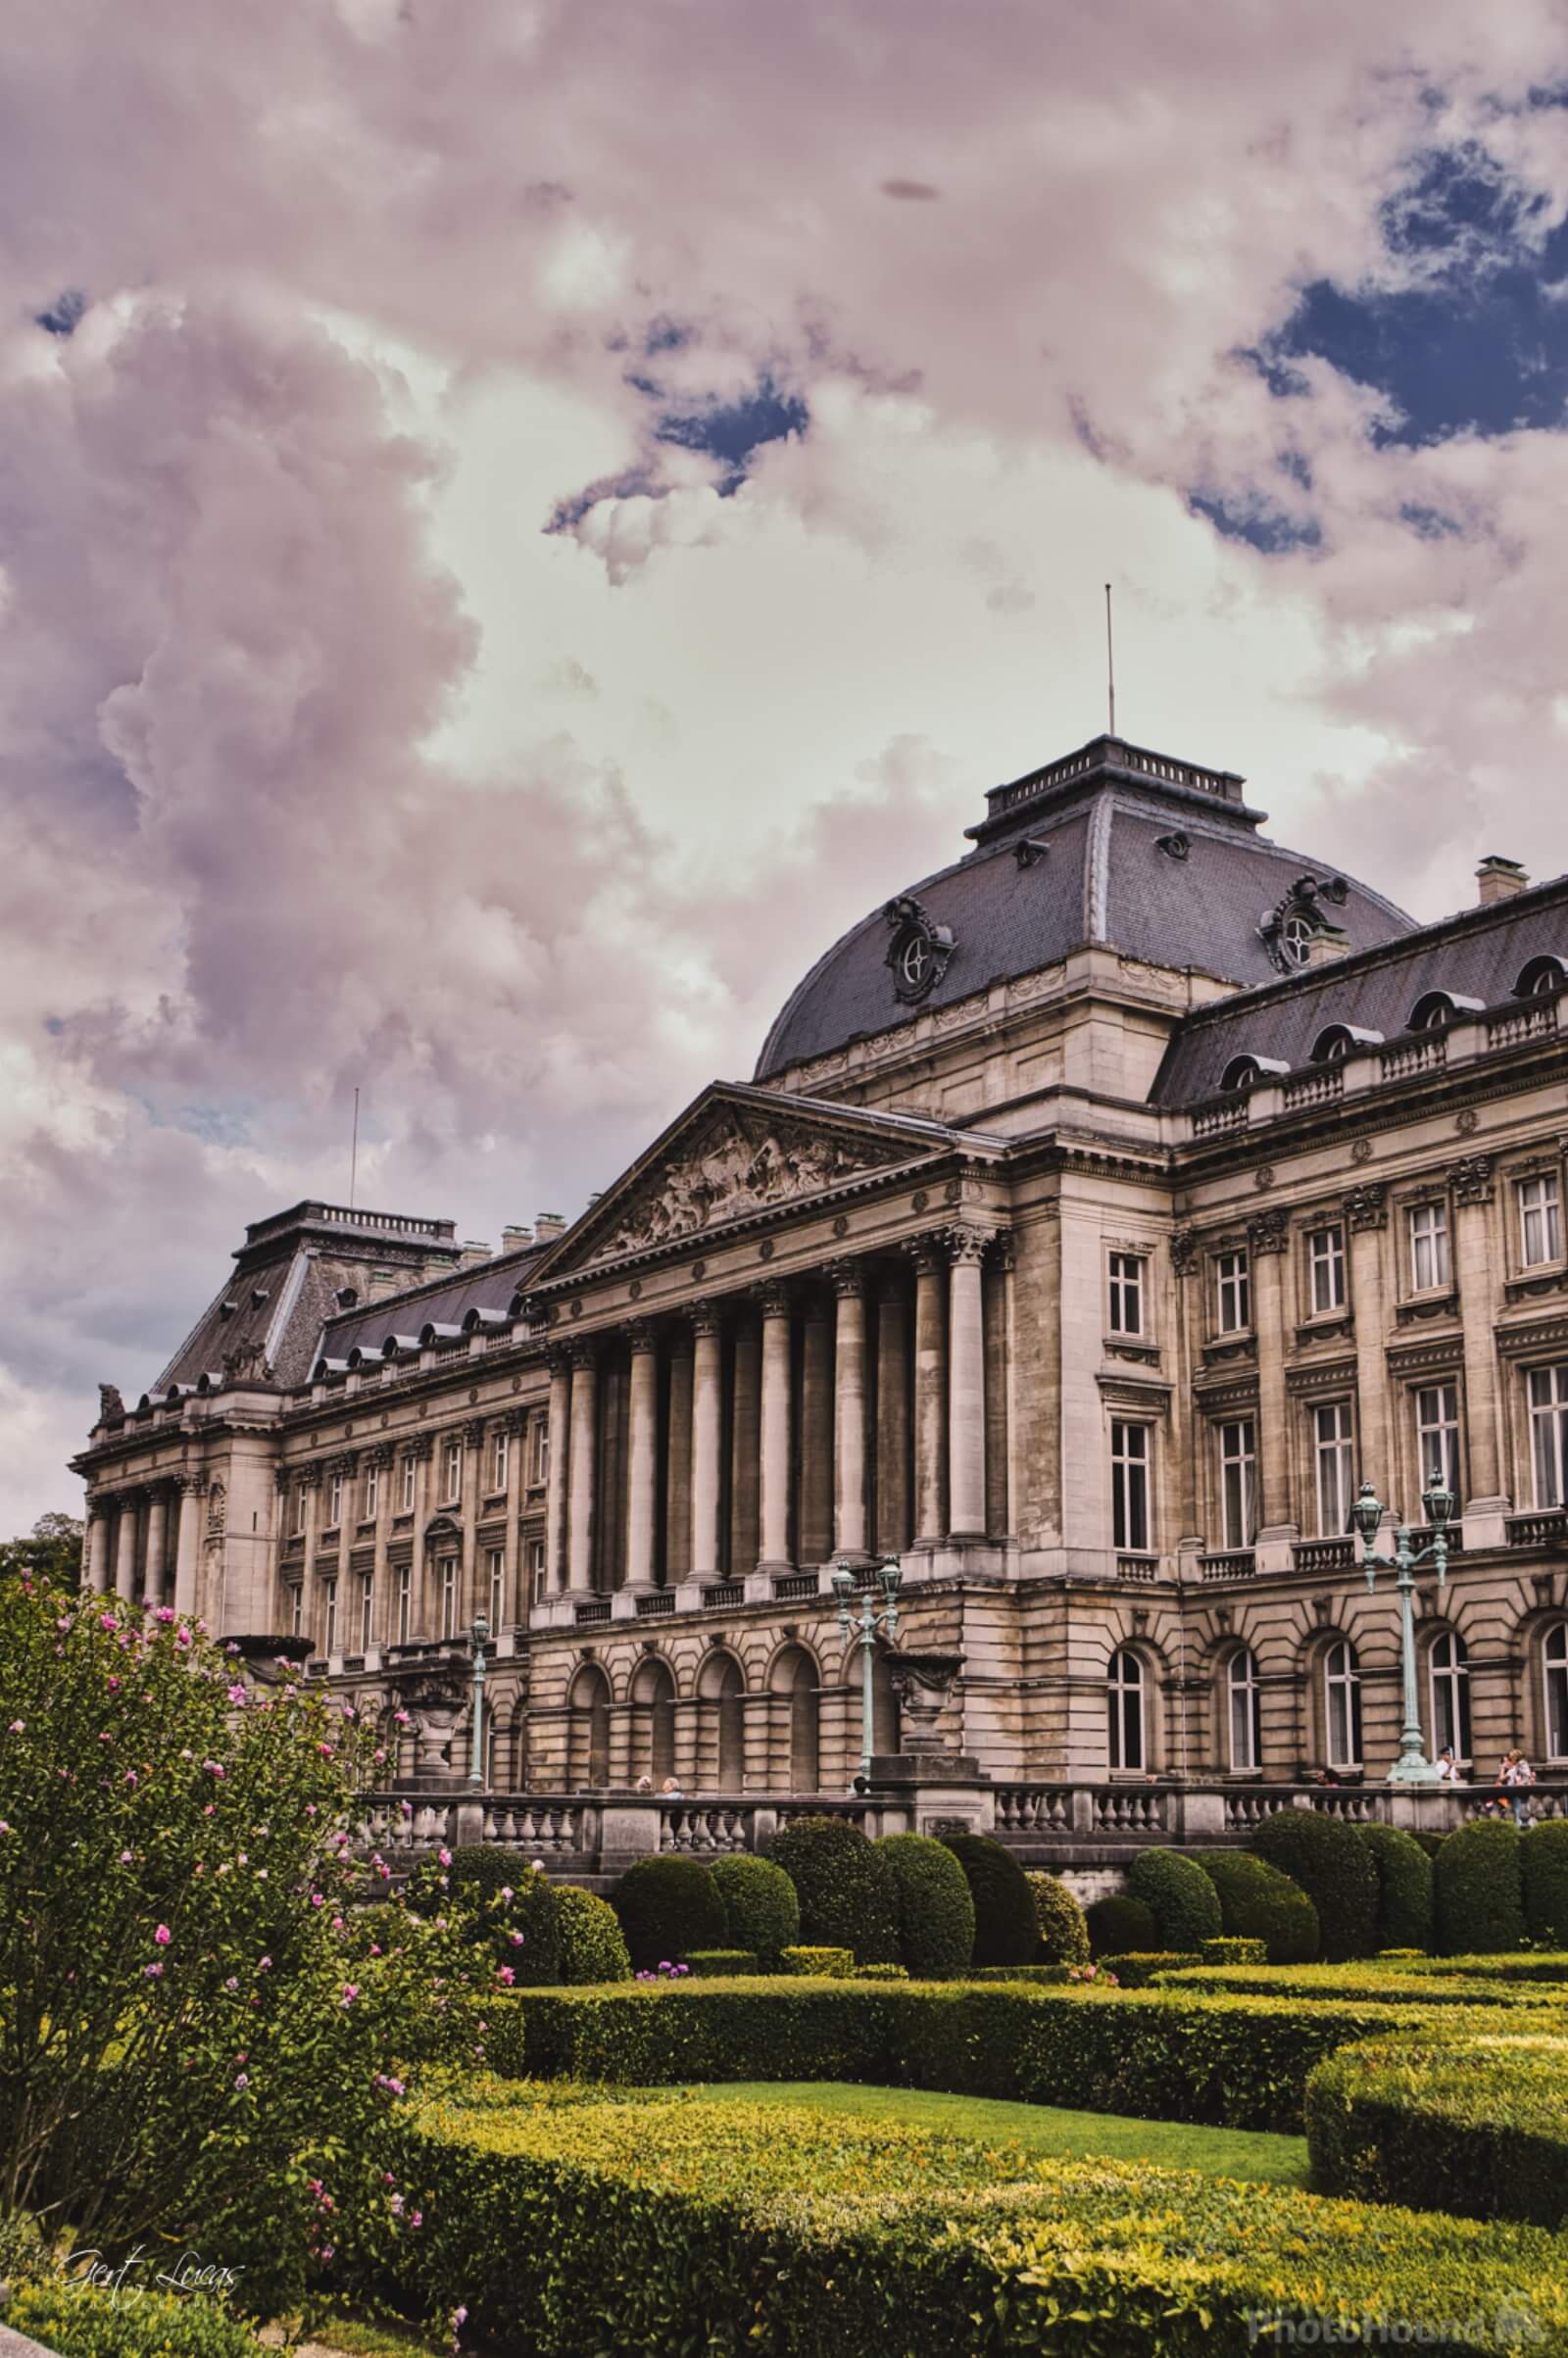 Image of Royal Palace, Brussels by Gert Lucas